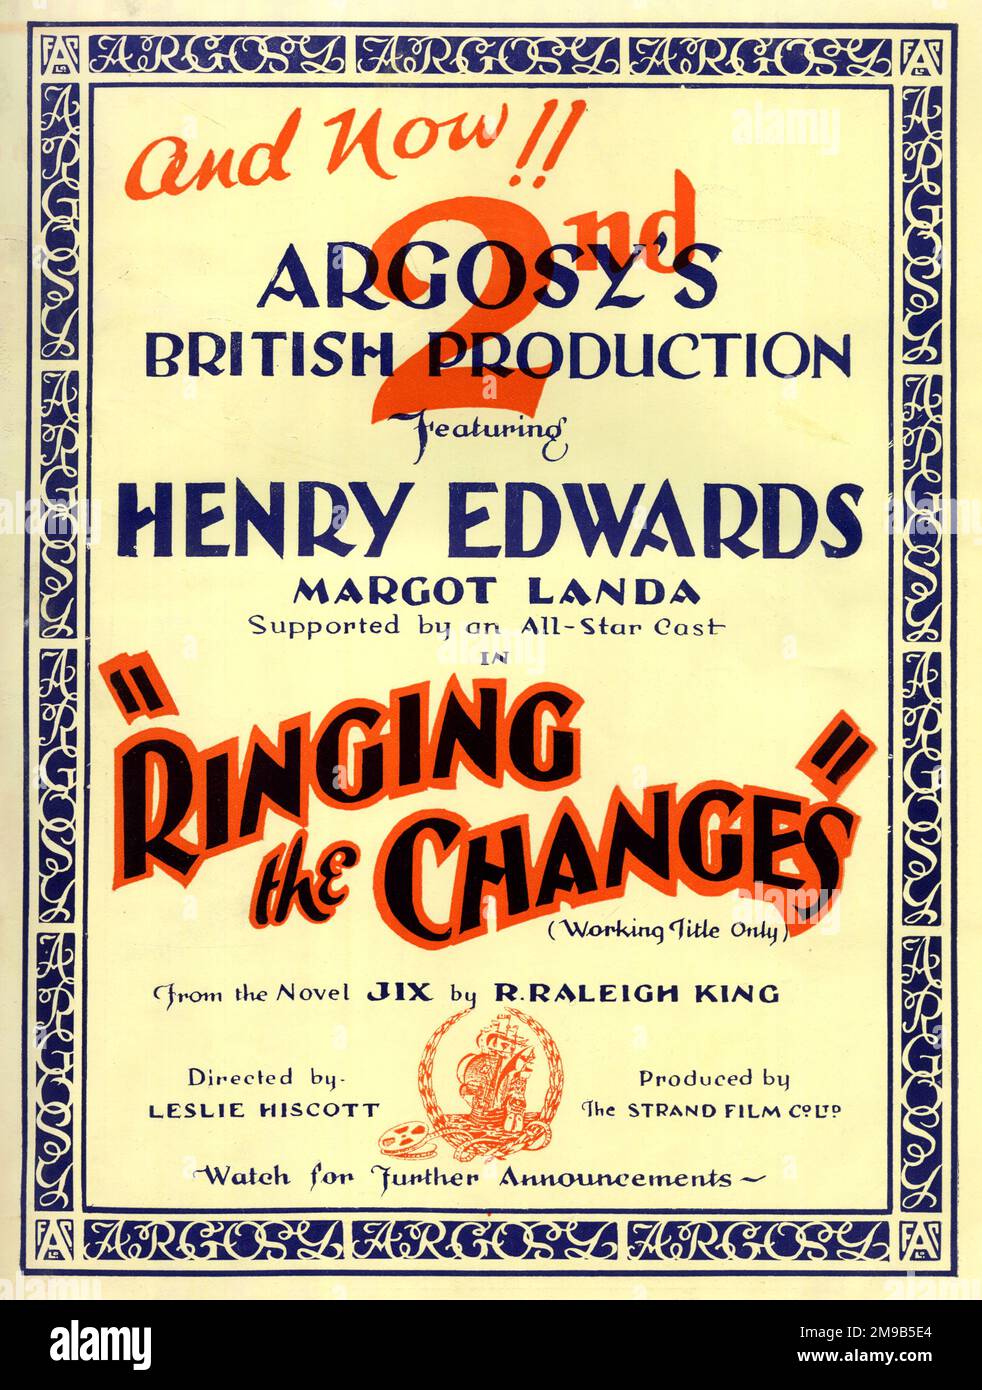 Argosy Productions film, Ringing the Changes, featuring Henry Edwards and Margot Landa, based on the novel Jix by R Raleigh King, directed by Leslie Hiscott Stock Photo